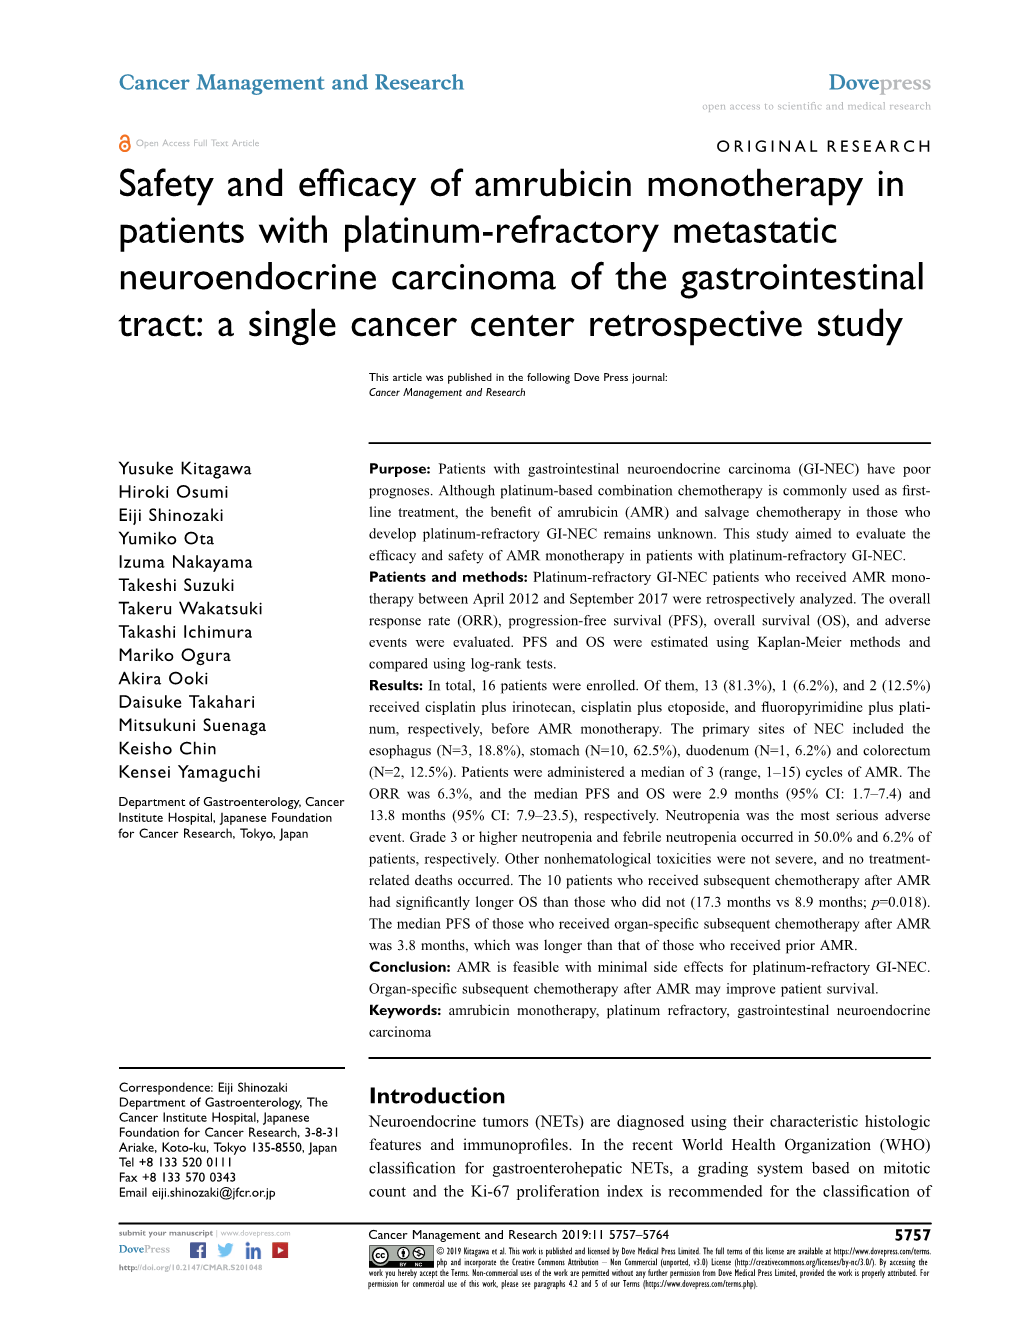 Safety and Efficacy of Amrubicin Monotherapy in Patients with Platinum-Refractory Metastatic Neuroendocrine Carcinoma of the Gastrointestinal Tract: a Single Cancer Center Retrospective